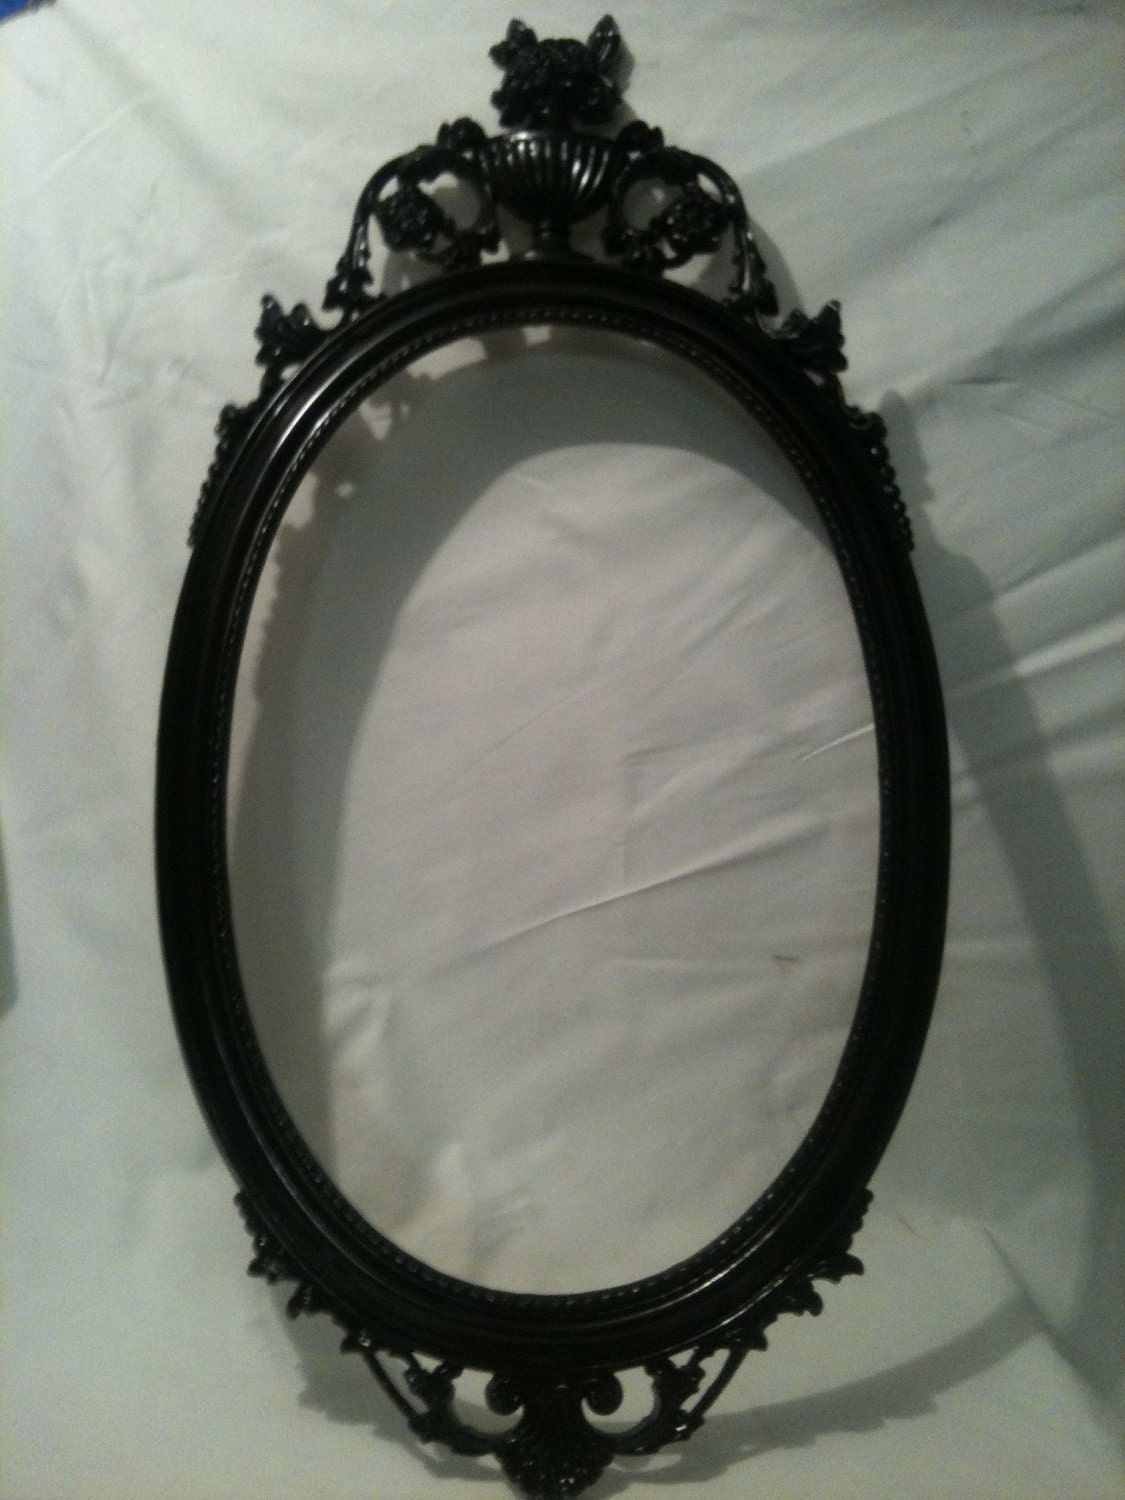 Gloss Black Oval Picture Frame Mirror Shabby Chic Baroque Inside Black Oval Cut Wall Mirrors (View 7 of 15)